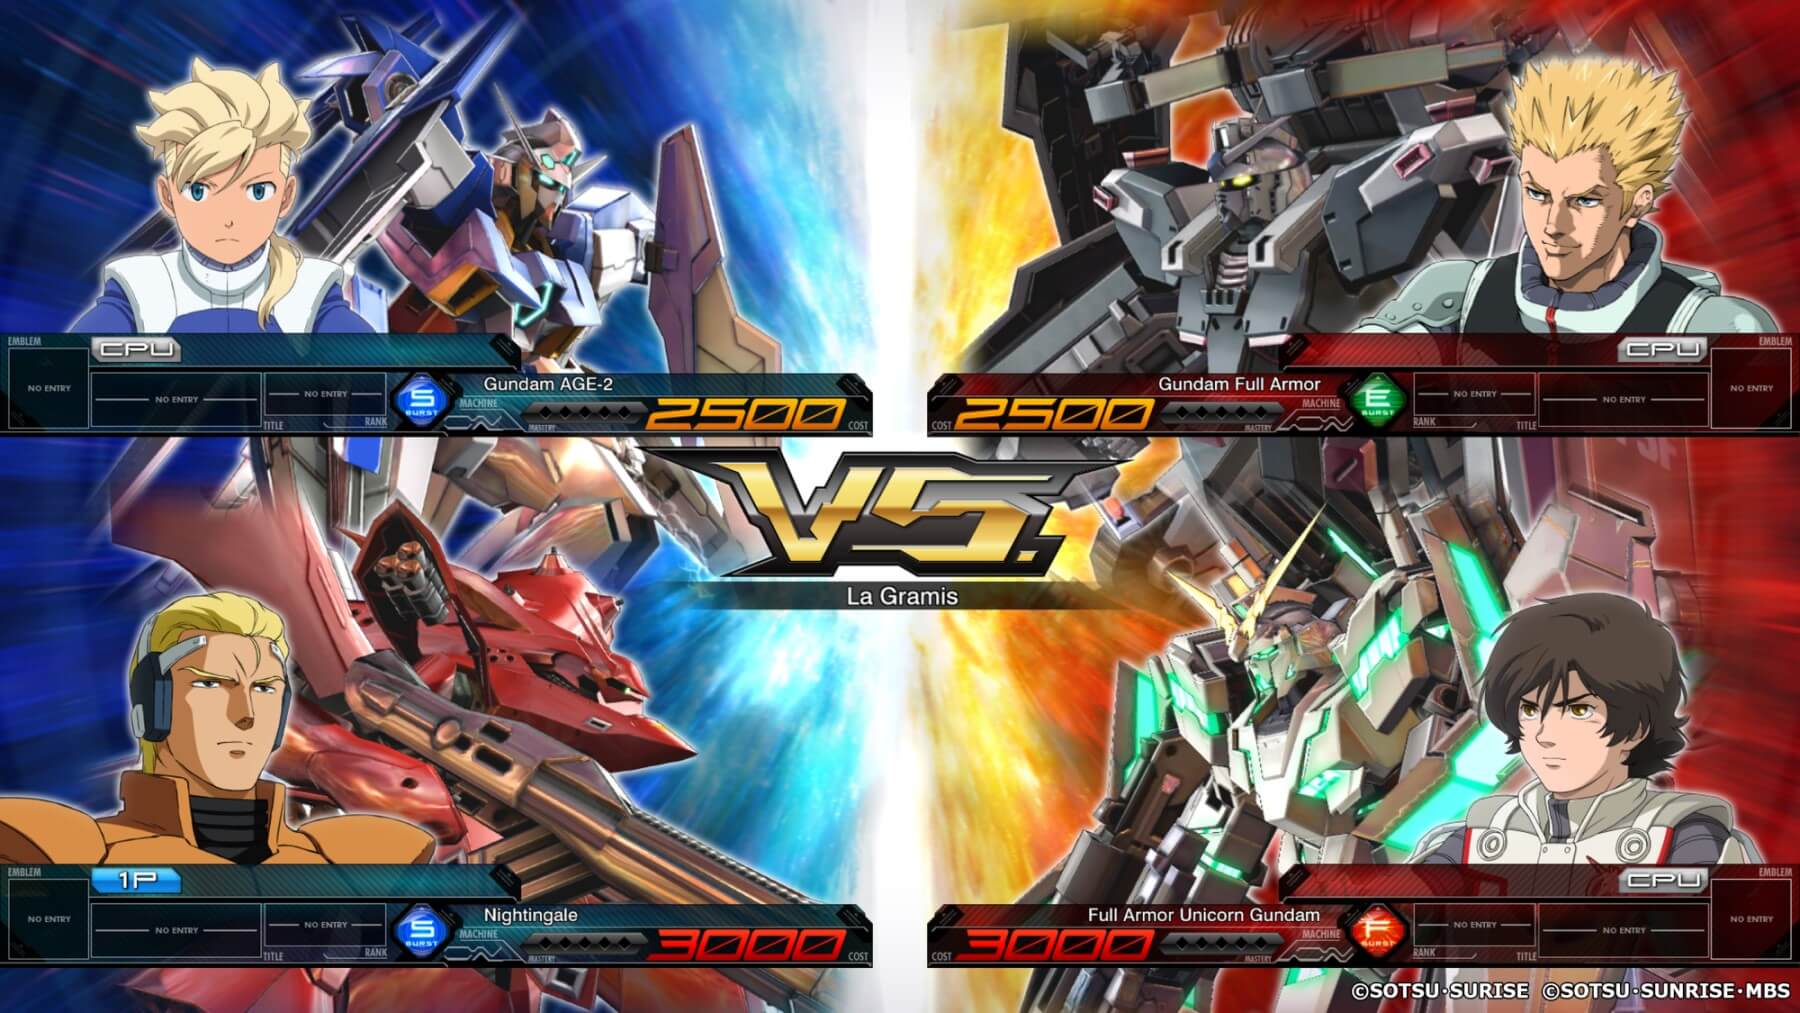 Mobile Suit Gundam Extreme VS. Maxiboost On Networking